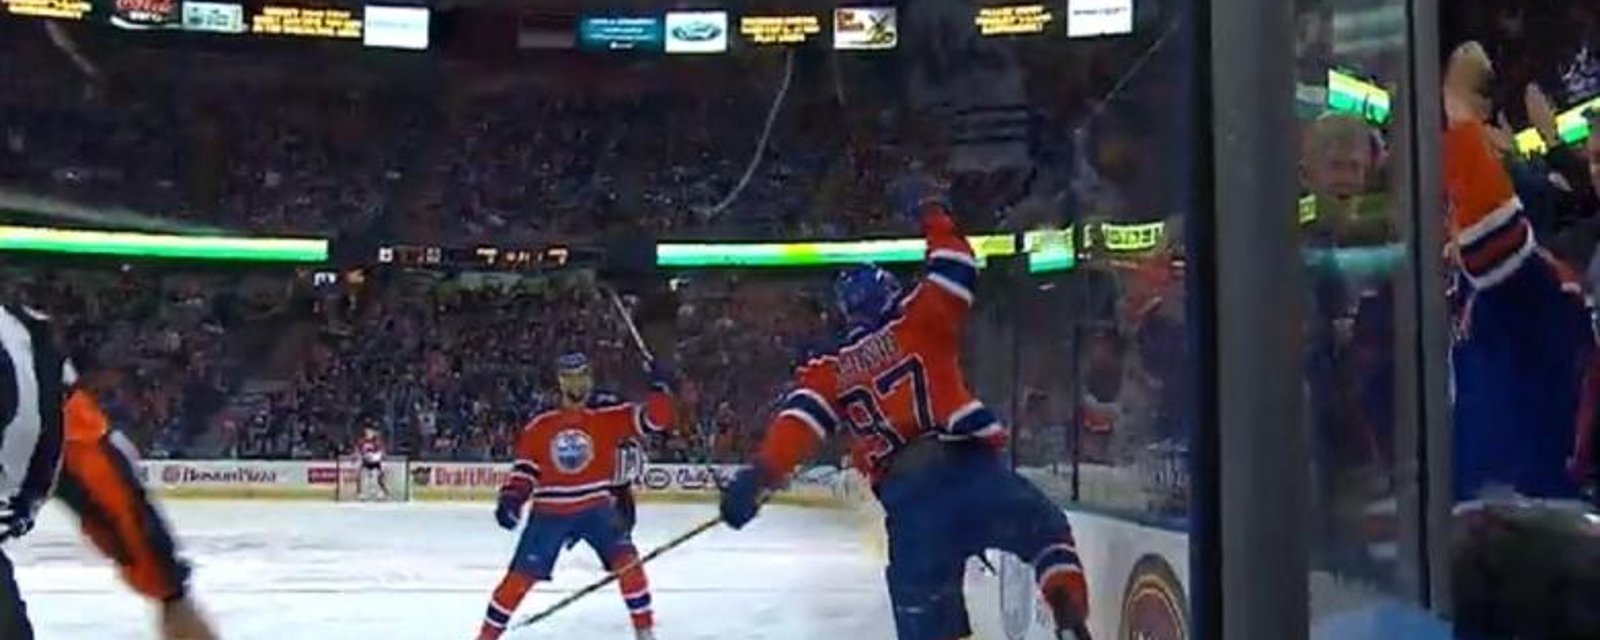 Connor McDavid with yet another great goal!